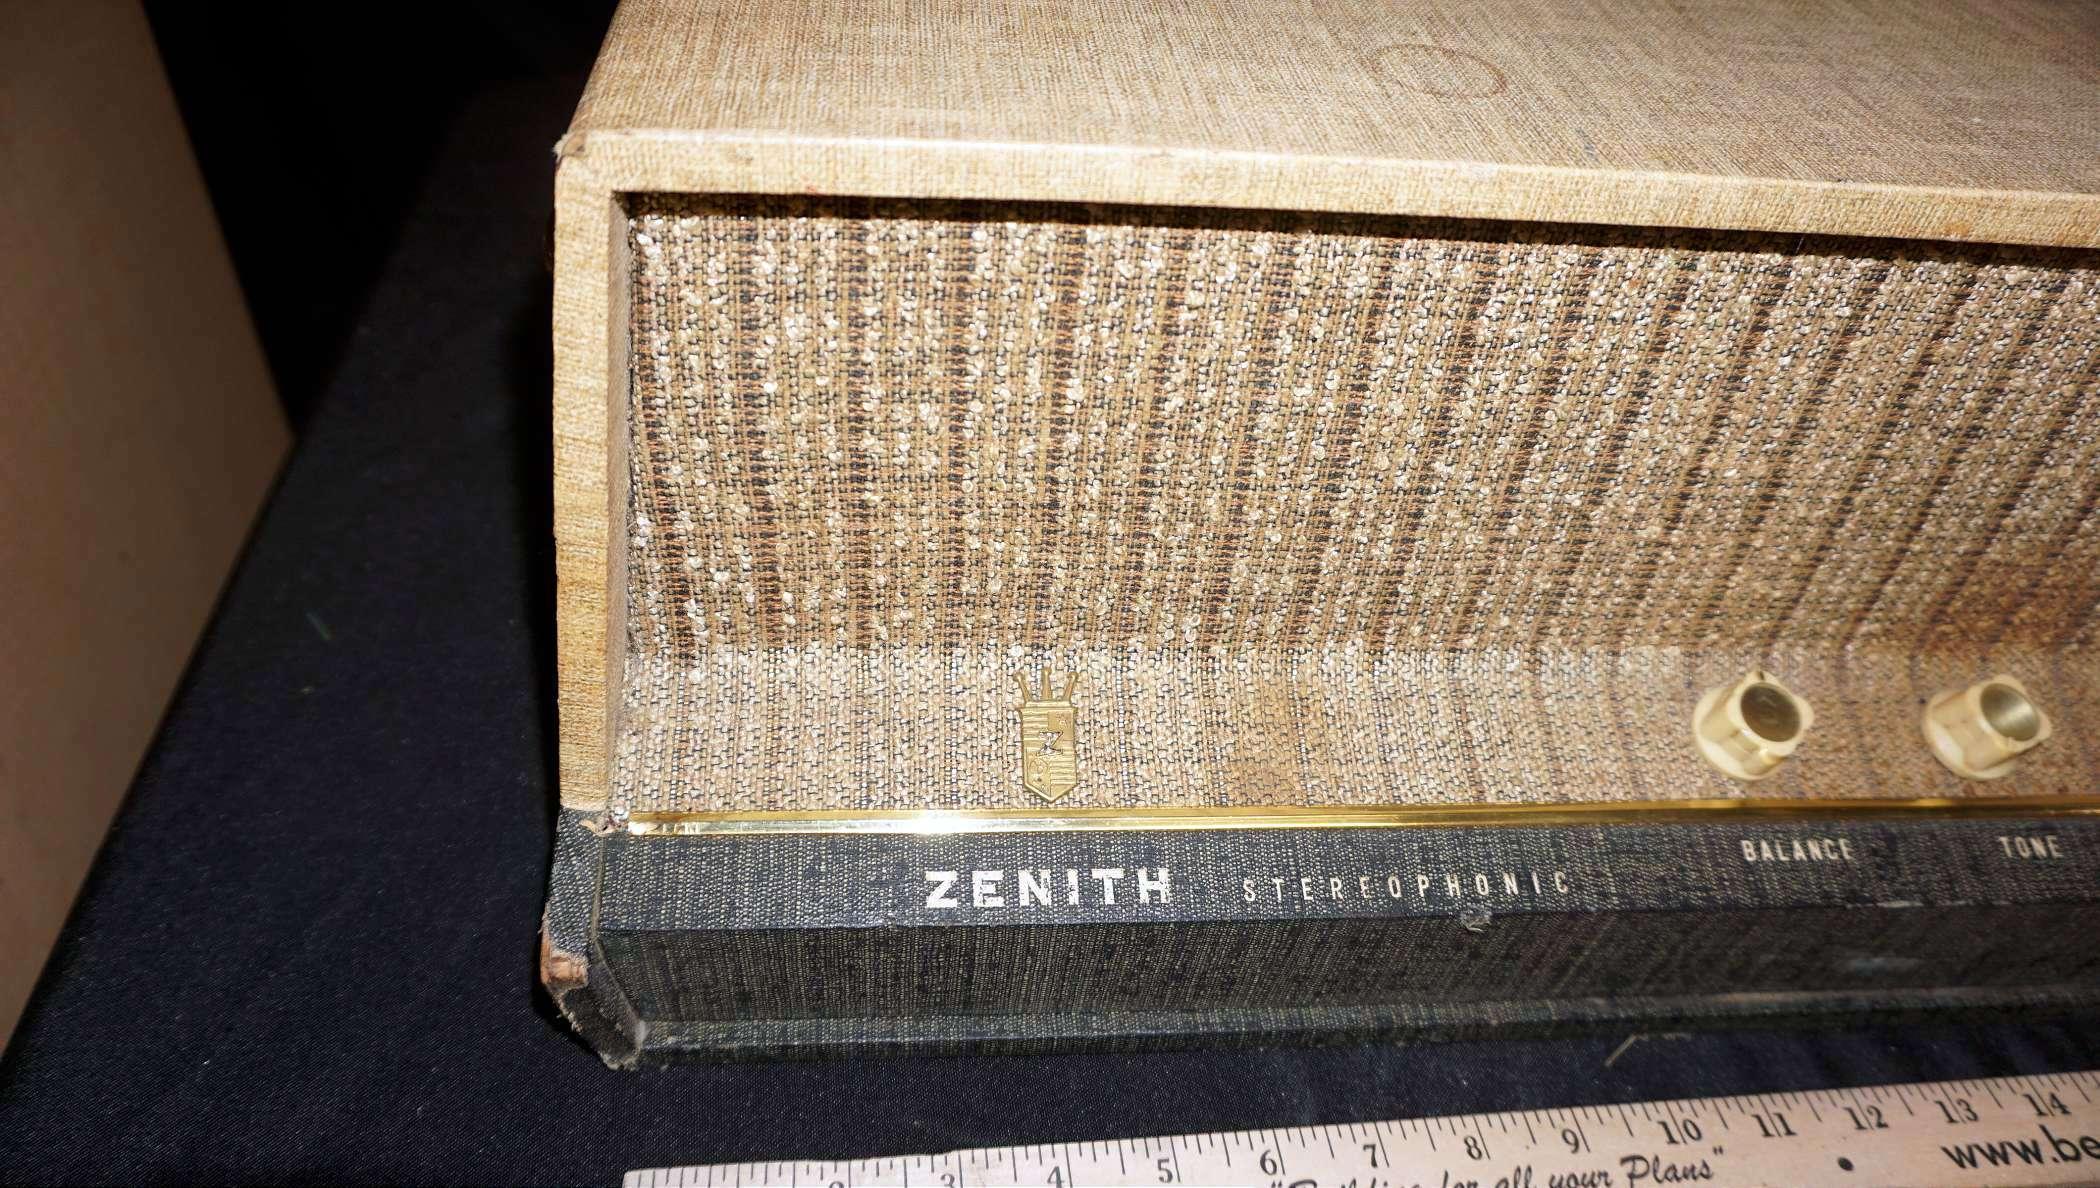 Zenith Stereophonic